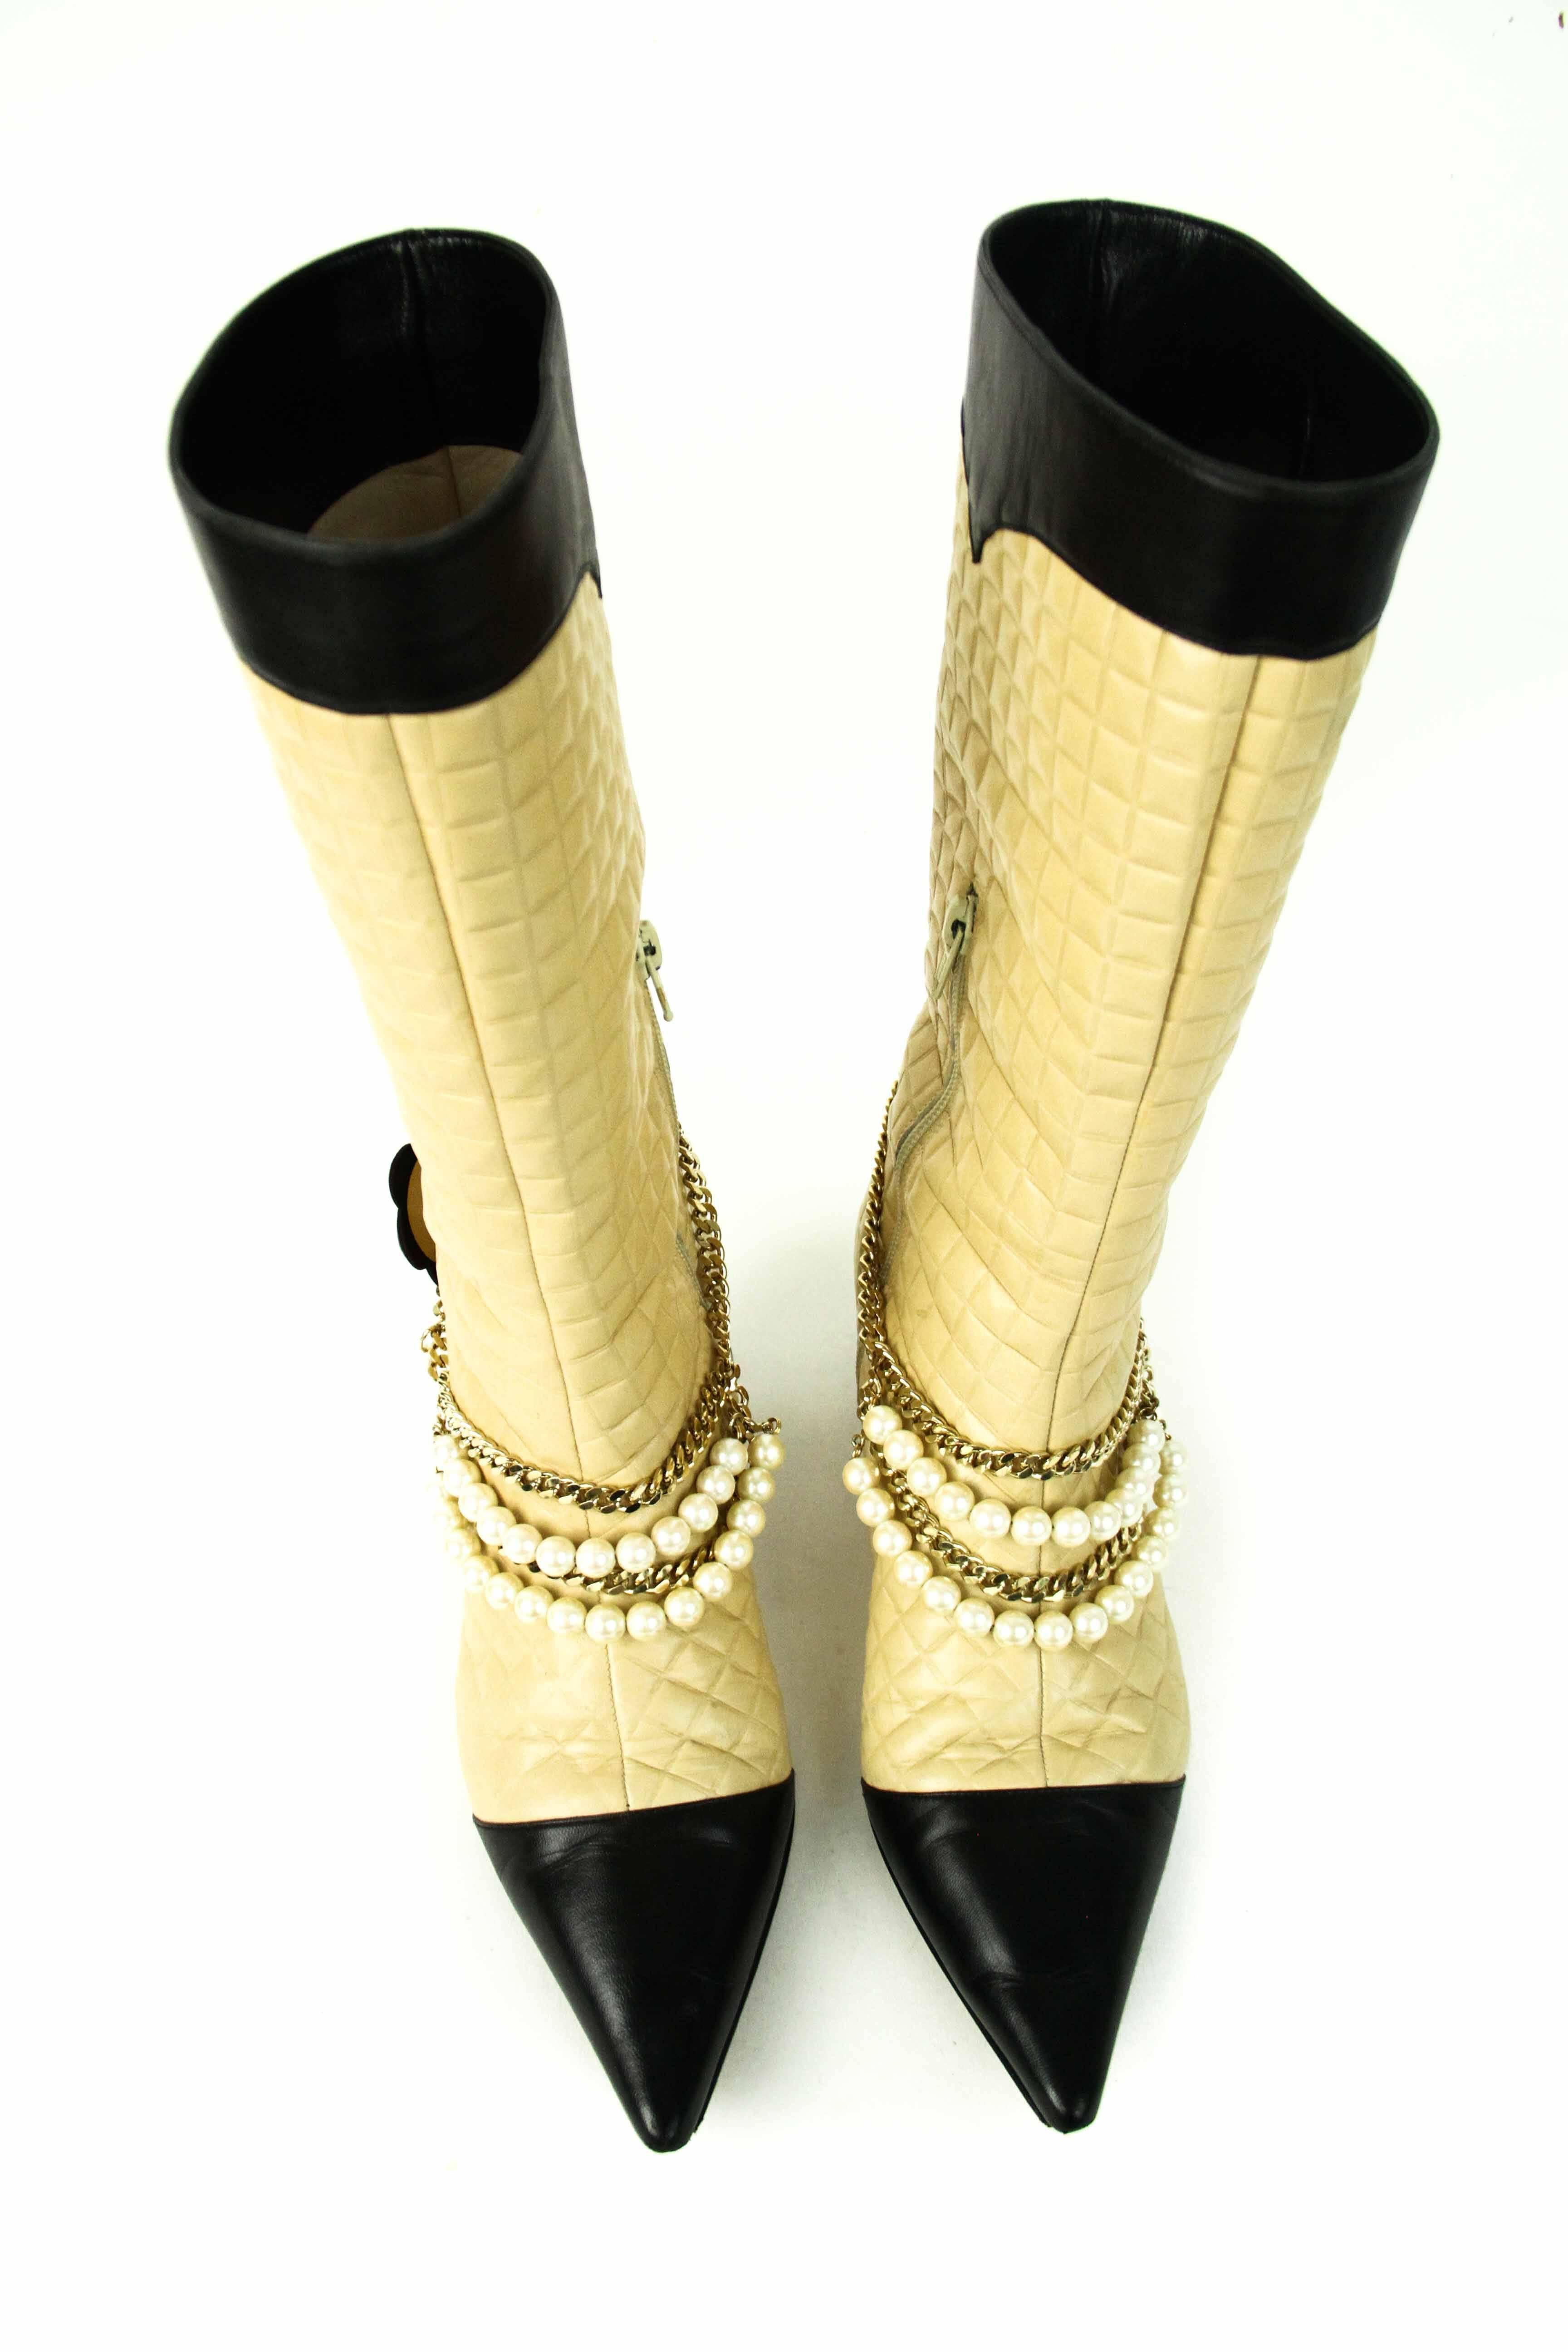 CHANEL Quilted Boot with Pearls and Camellia Flower 39.5 4